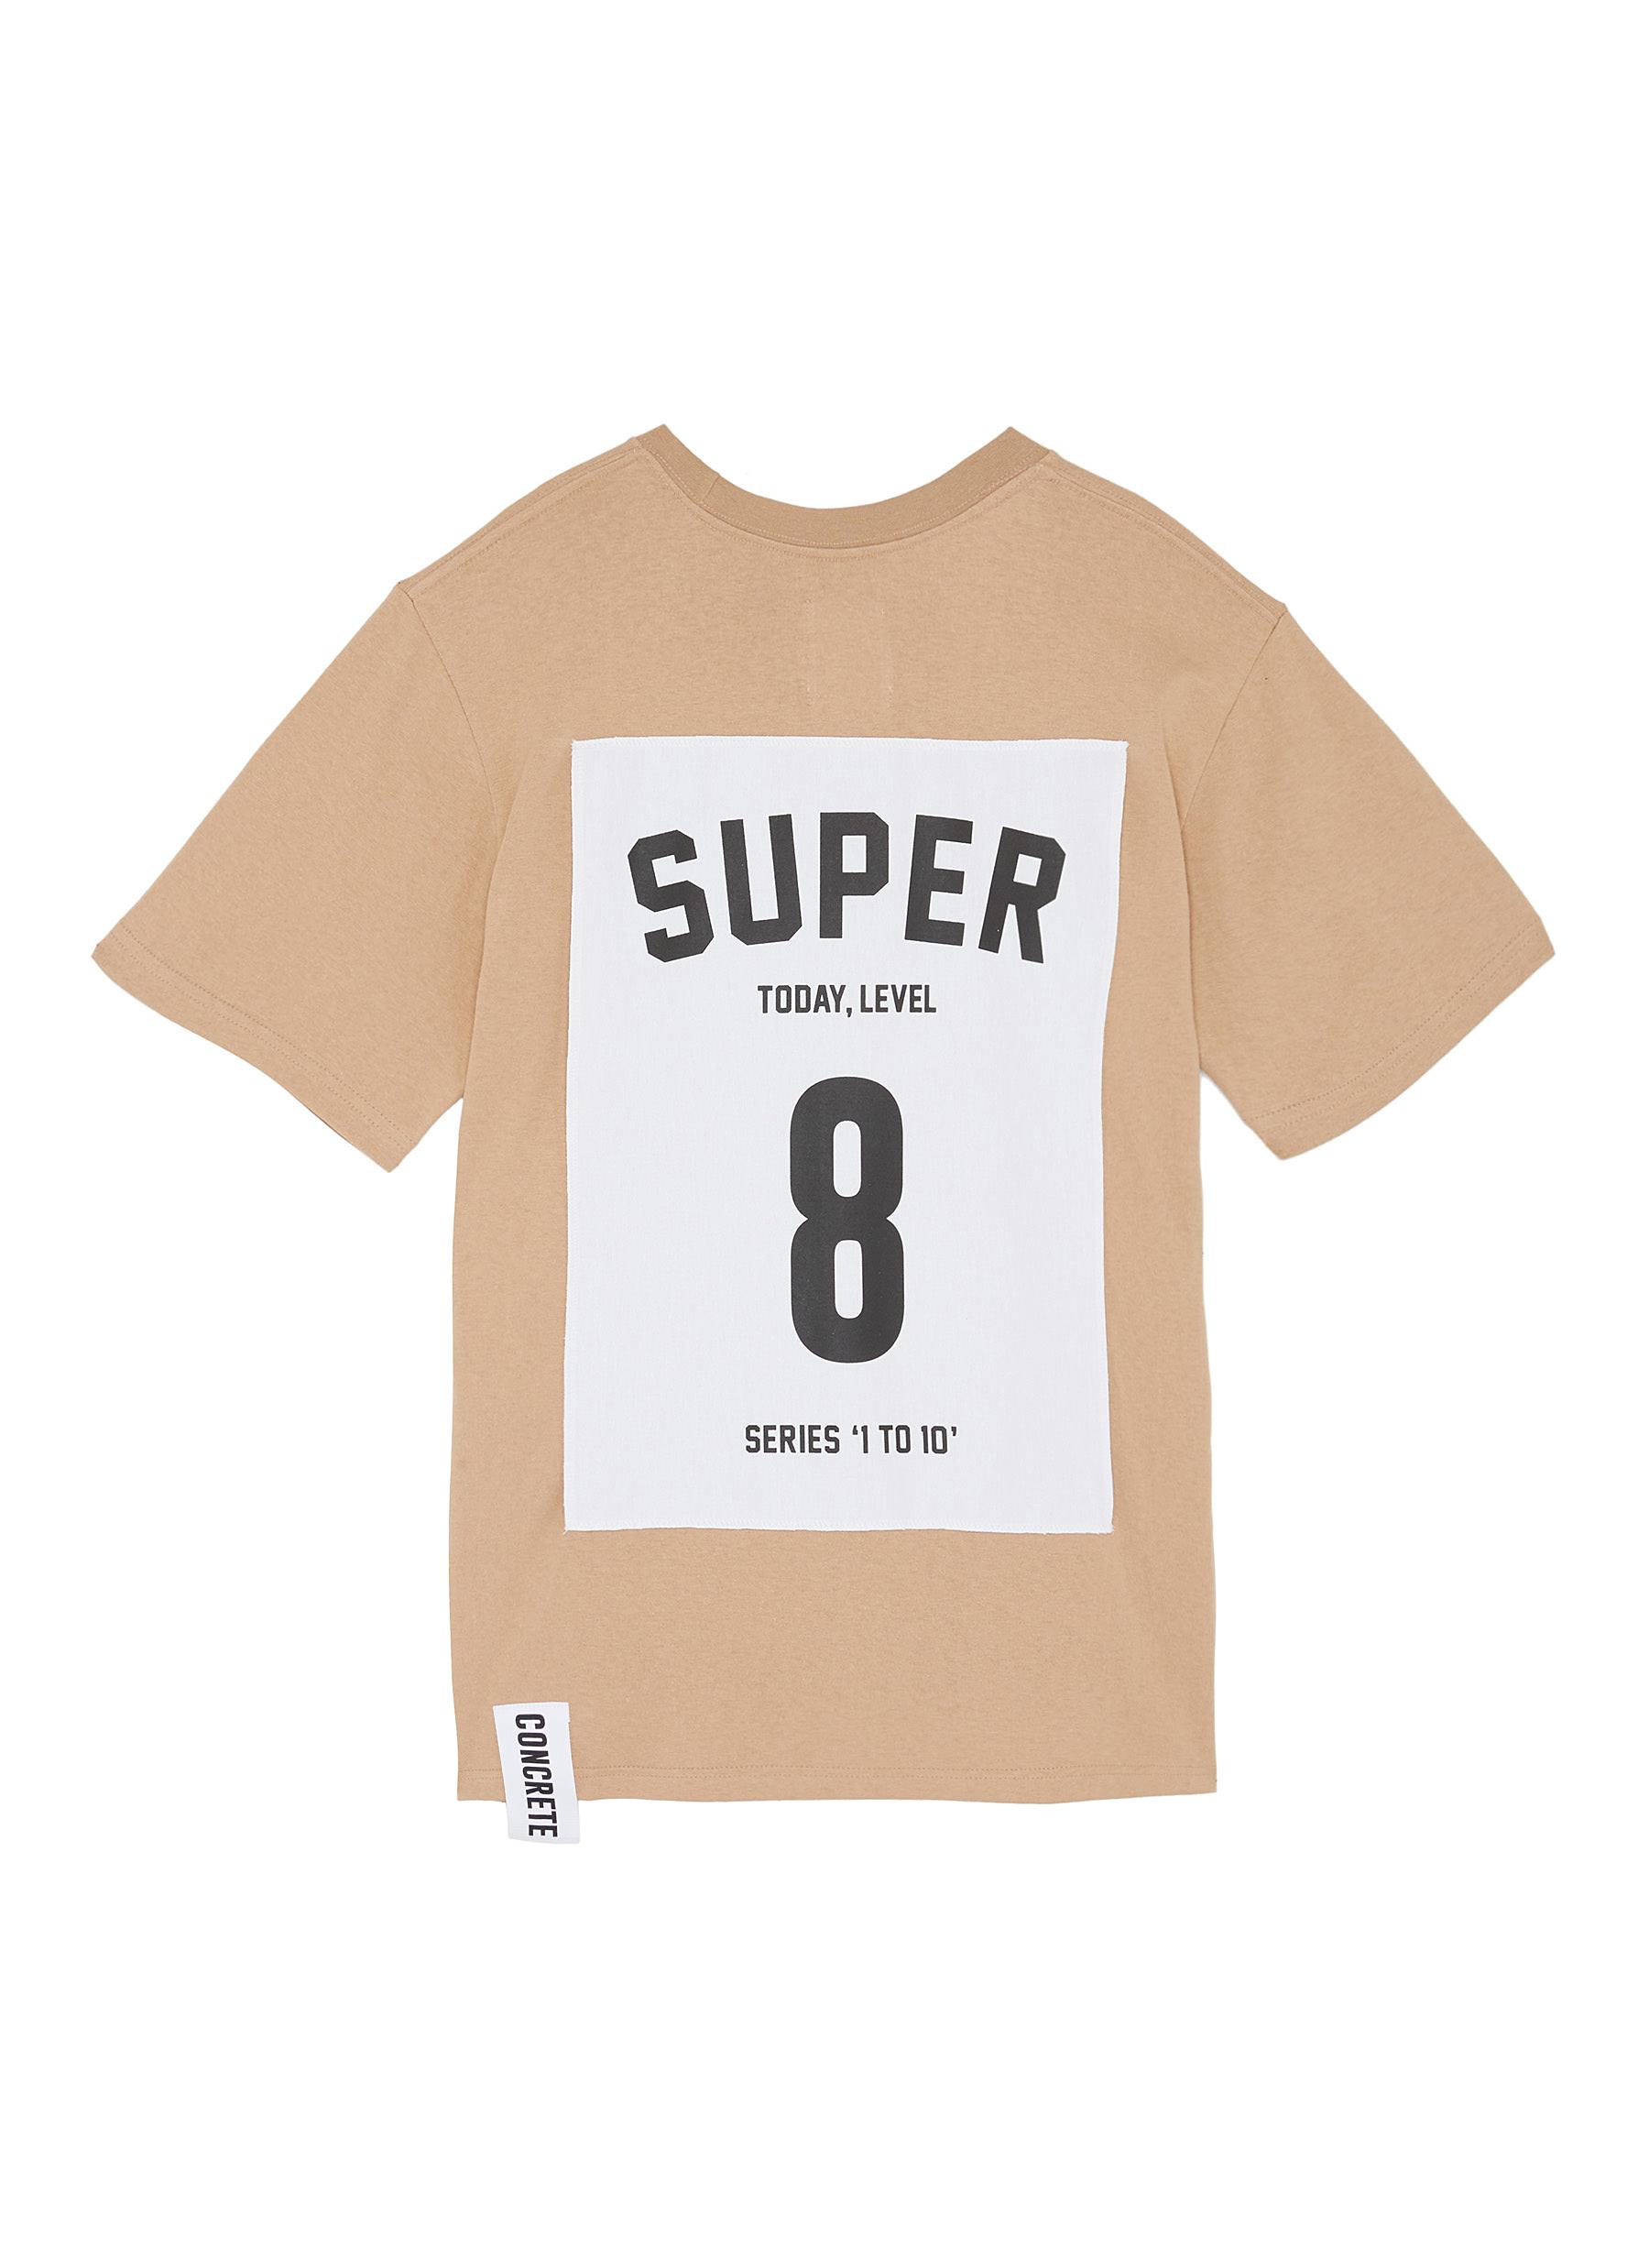 Series 1 to 10 oversized unisex T-shirt - 8 Super by Studio Concrete